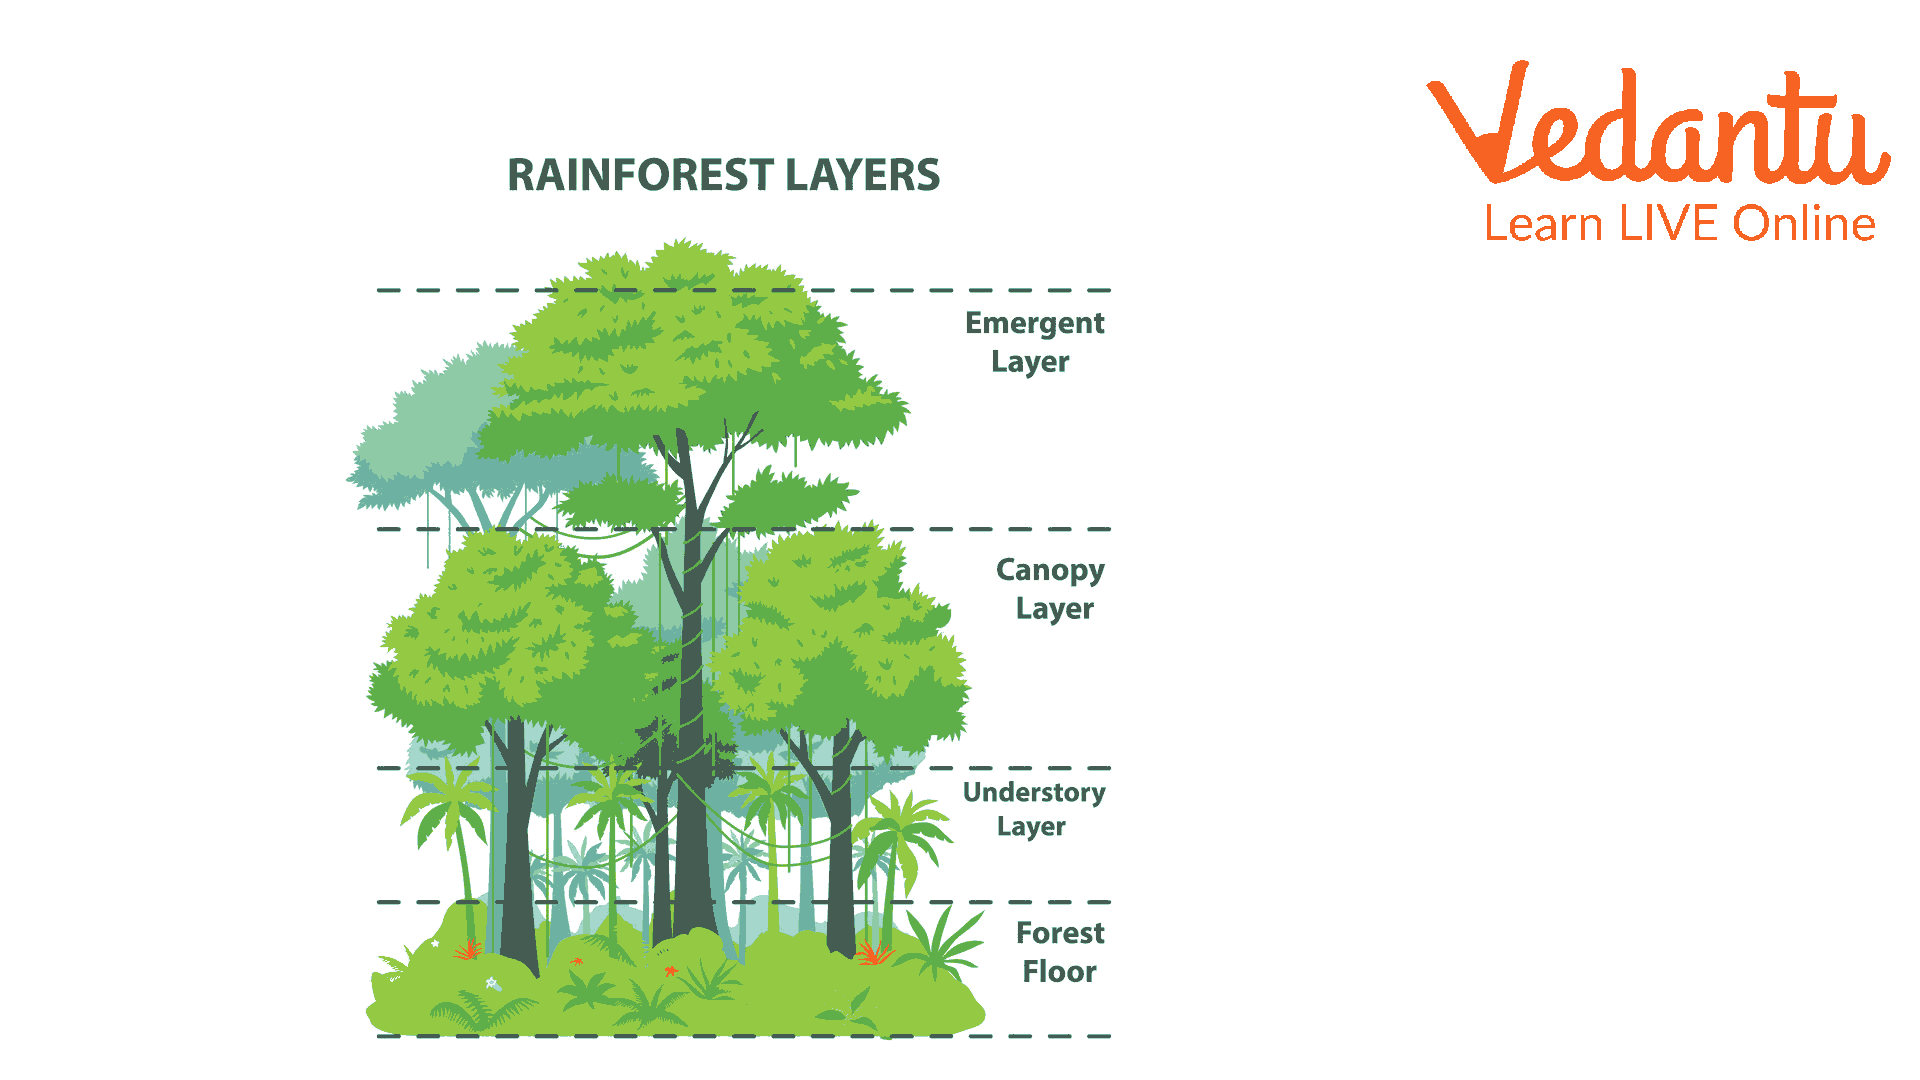 The Different Layers of the Rainforest